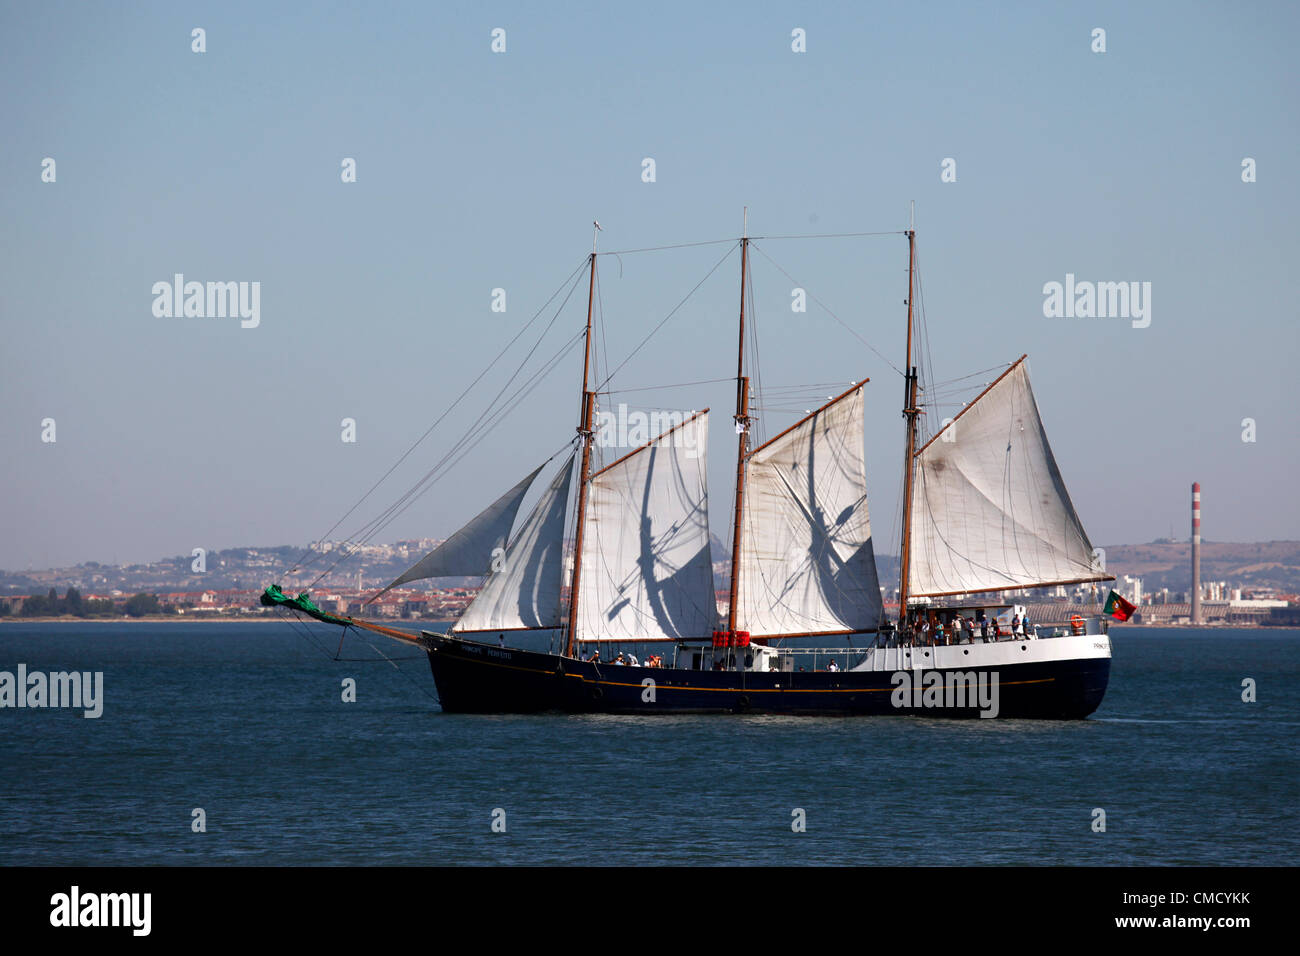 The fully rigged Principe Perfeito sailing ship sails on the River Tagus in Lisbon, Portugal. Stock Photo